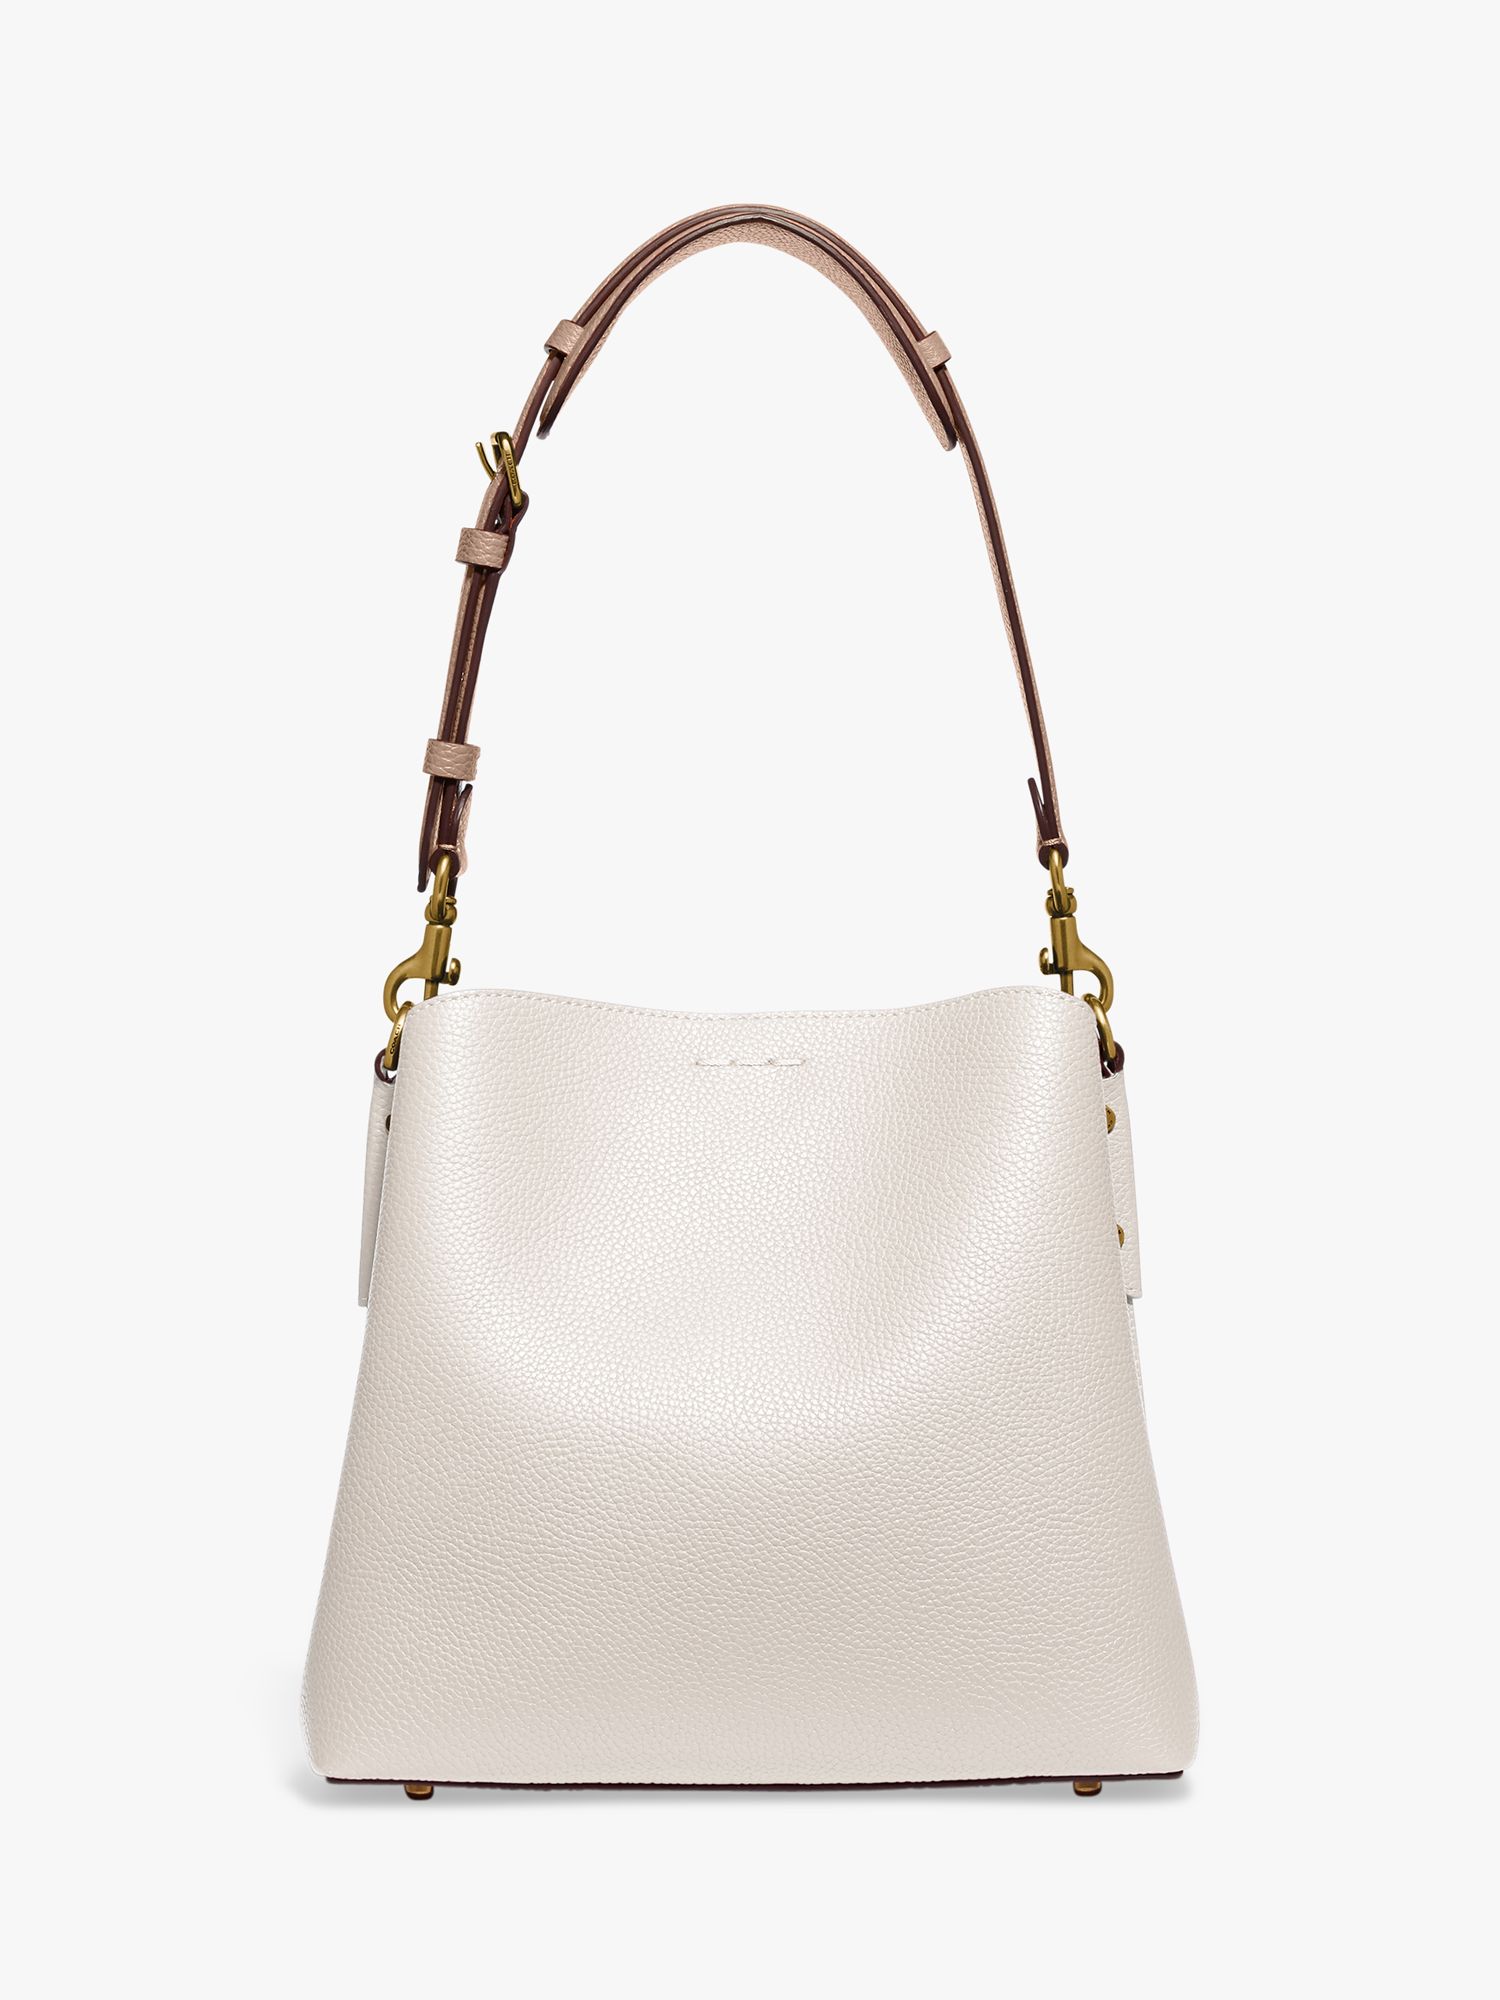 Buy Coach Willow Leather Bucket Bag Online at johnlewis.com